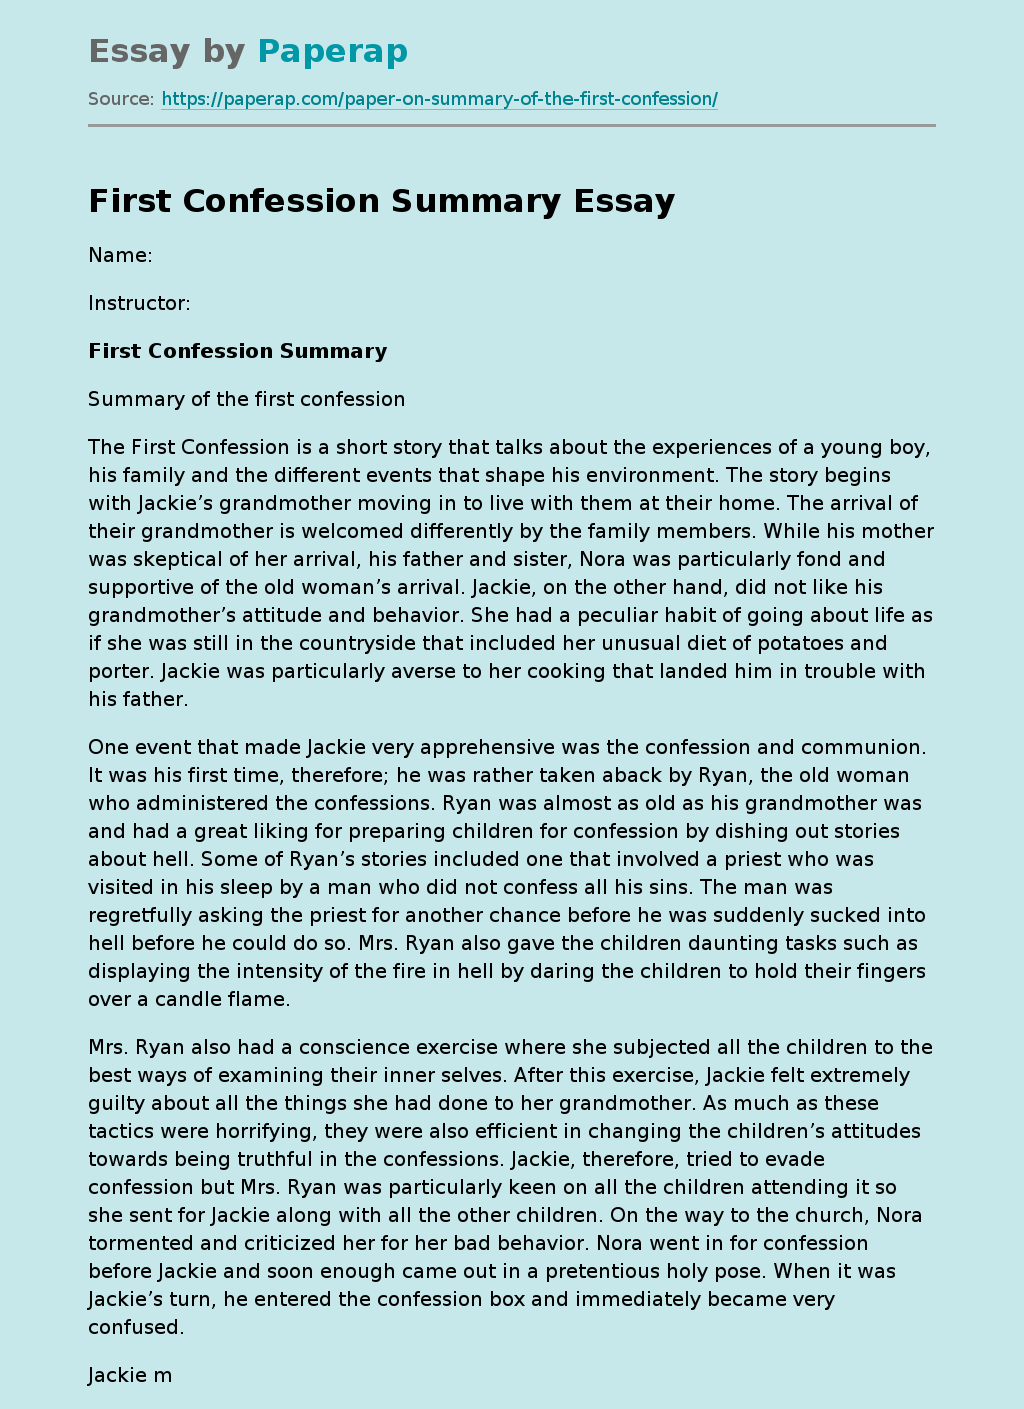 First Confession Summary